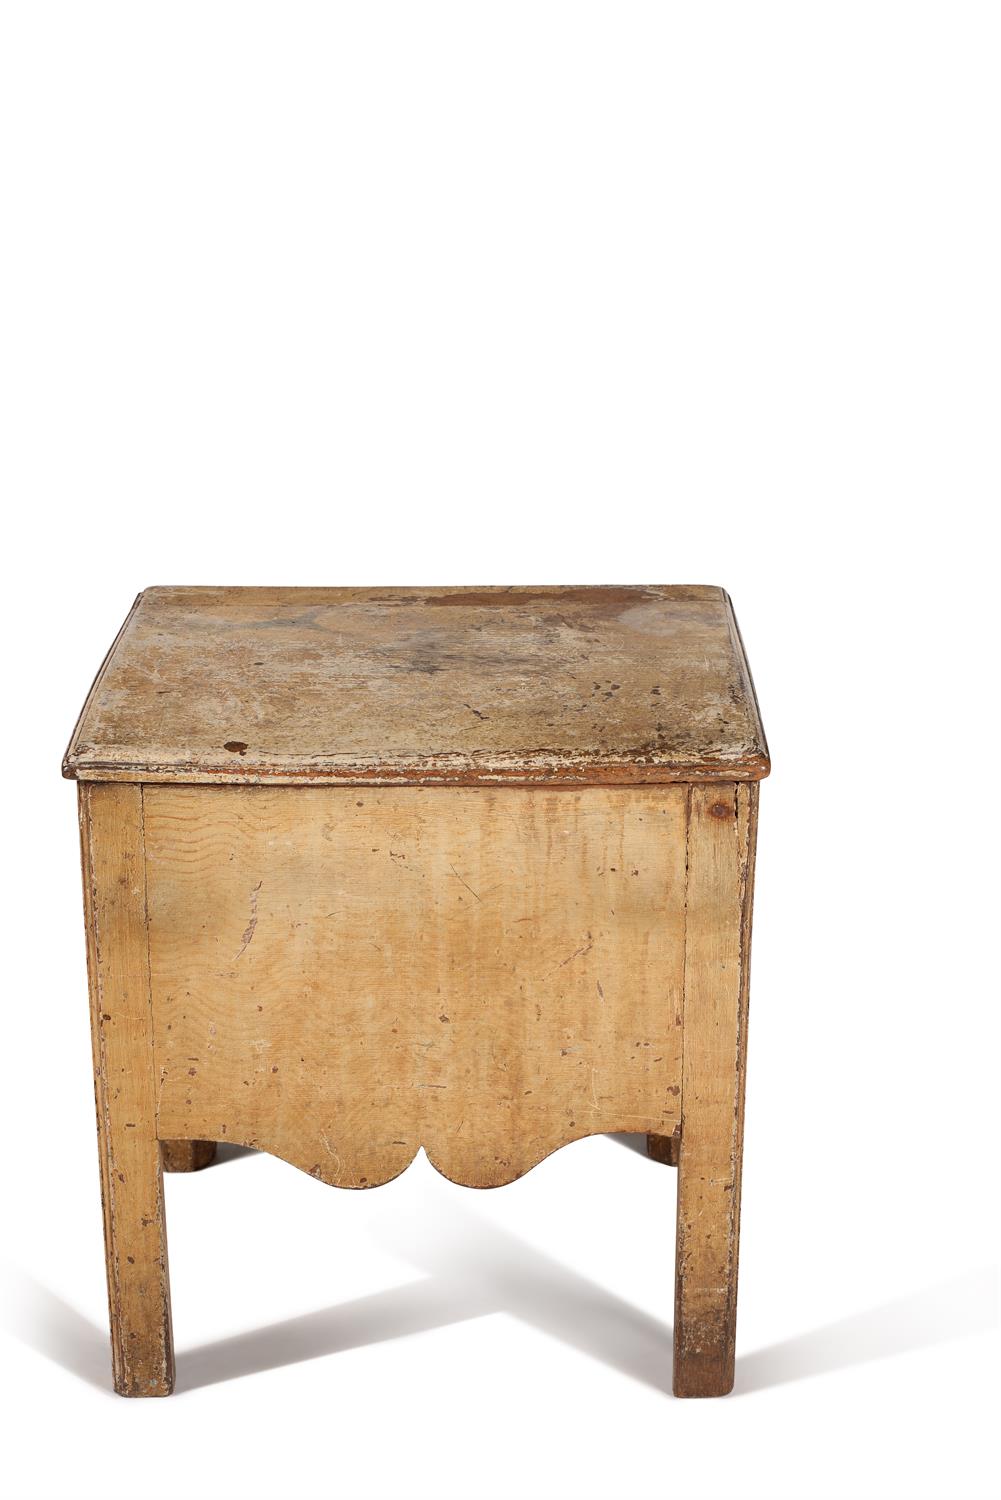 A George III cream painted bedside commode - Image 2 of 3